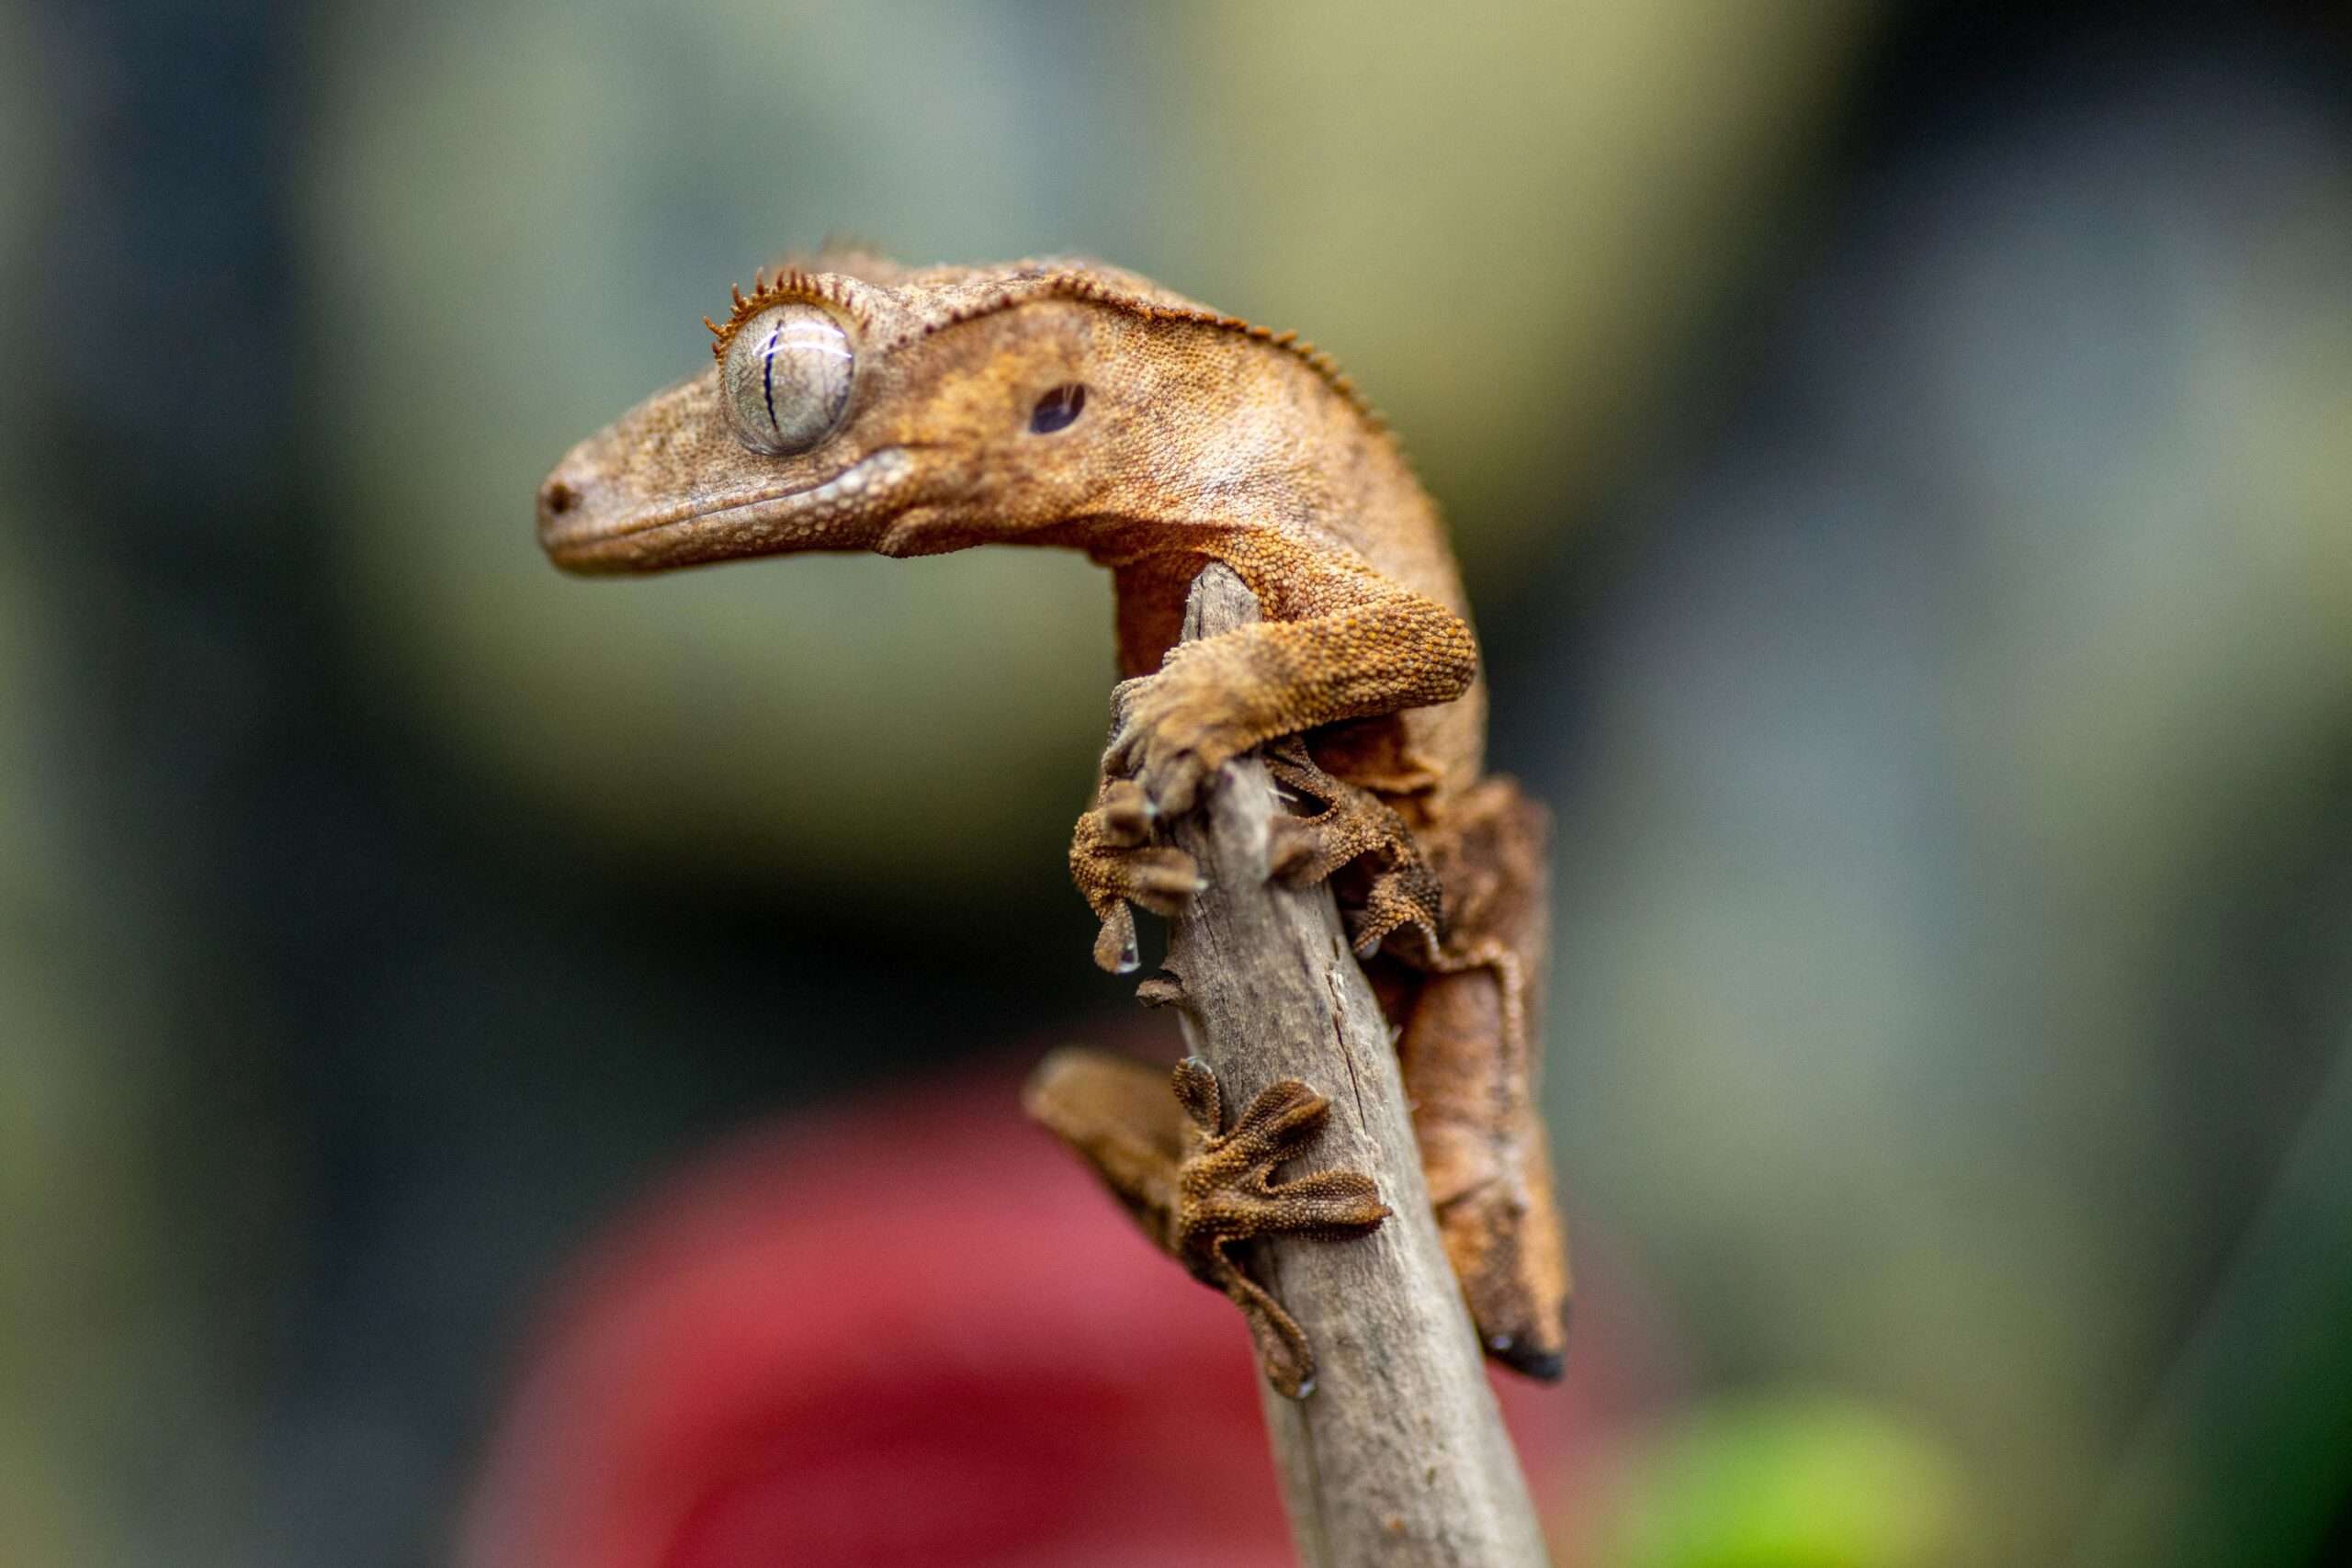 care-of-crested-geckos